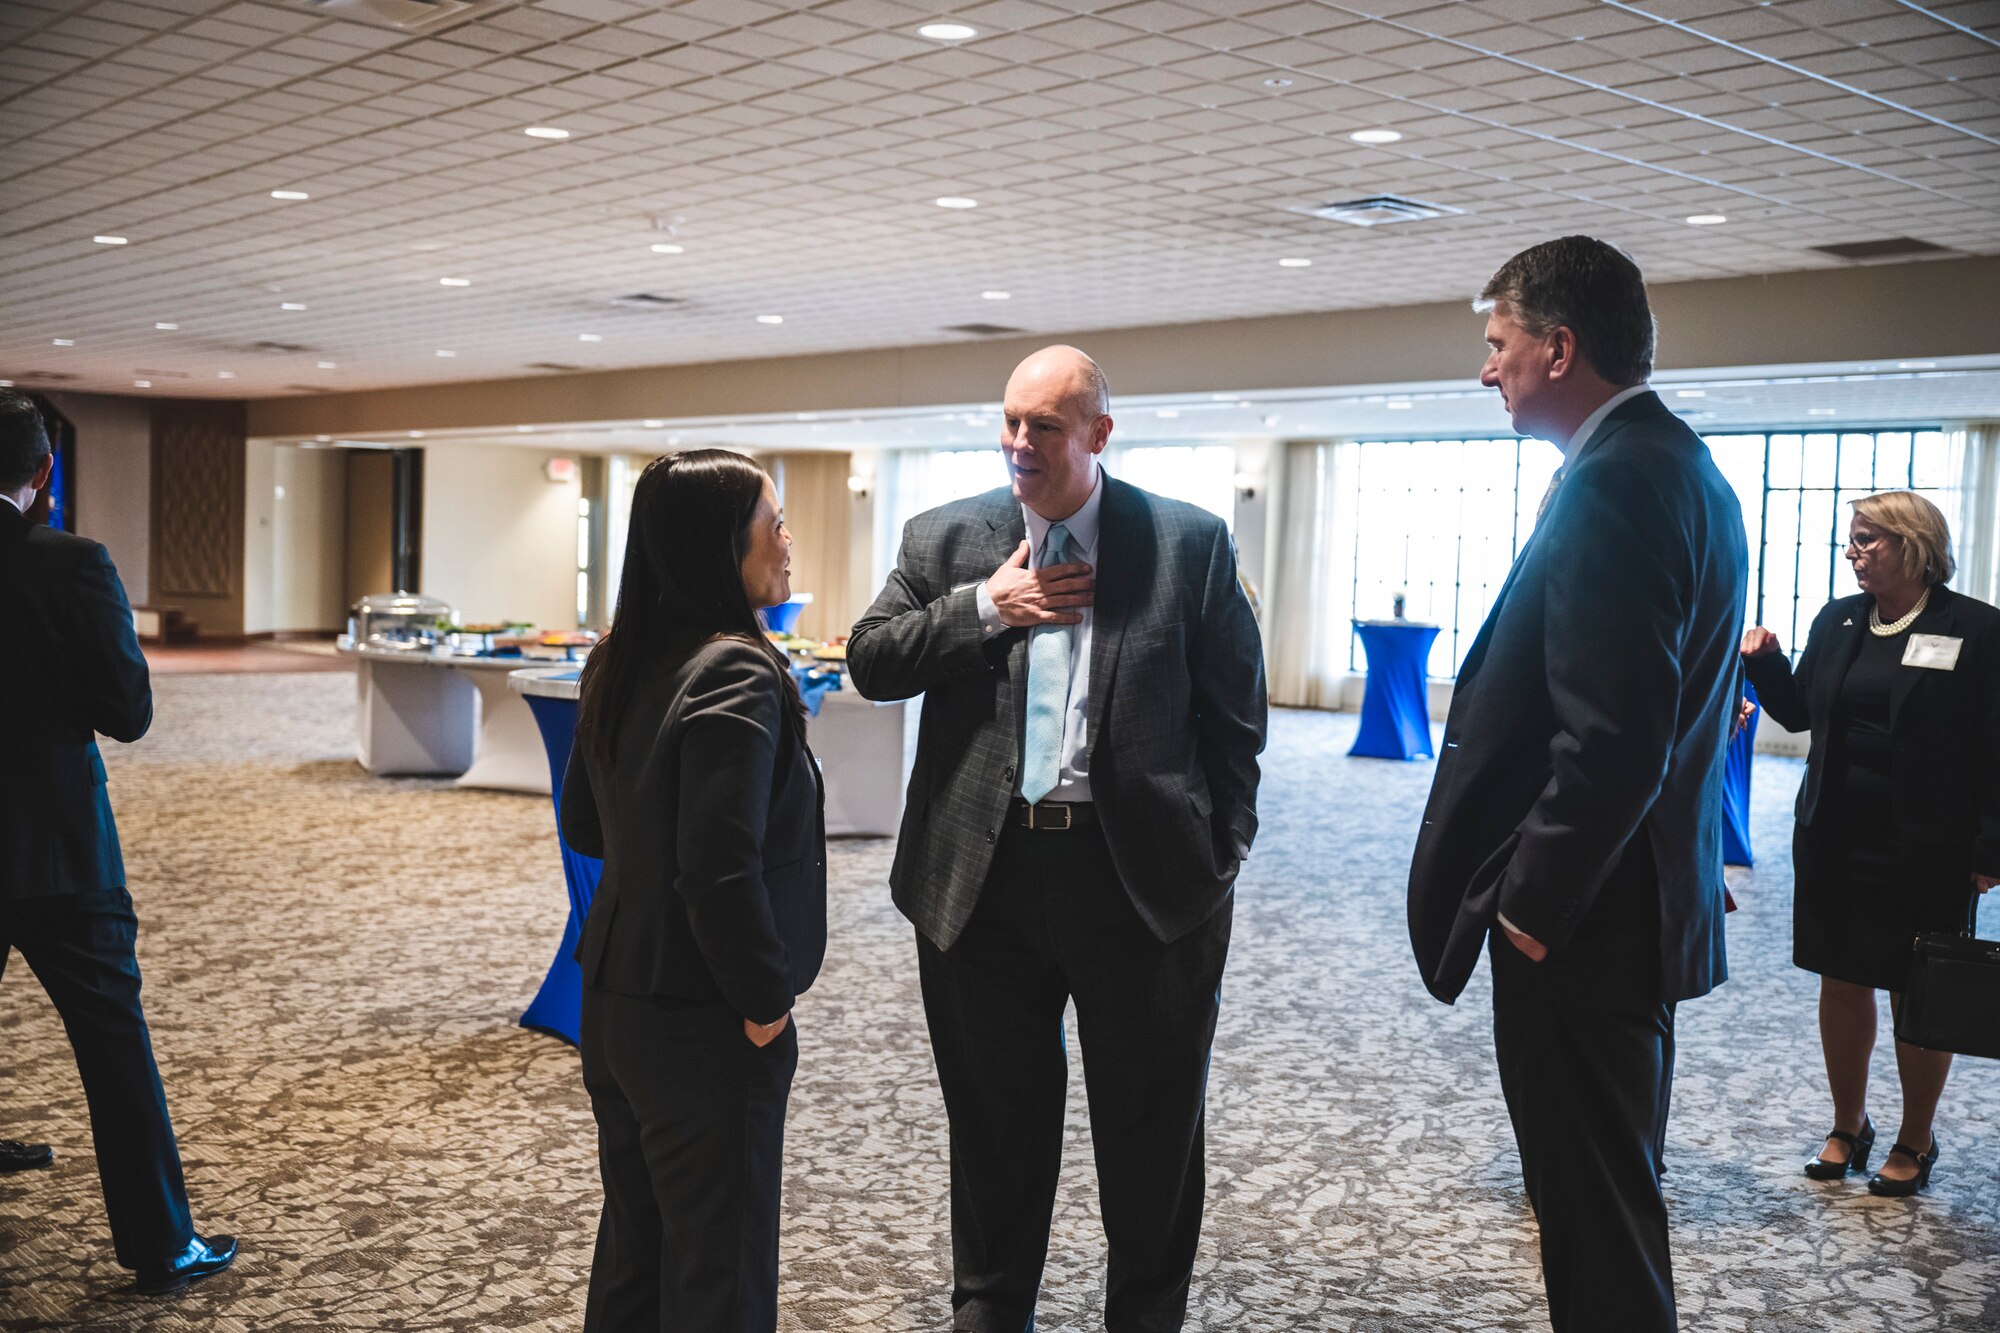 Christopher Kershner (center), Dayton Area Chamber of Commerce president, chats with Undersecretary of the Air Force Gina Ortiz Jones during a reception and social Jan. 9 at Wright-Patterson Air Force Base, Ohio.